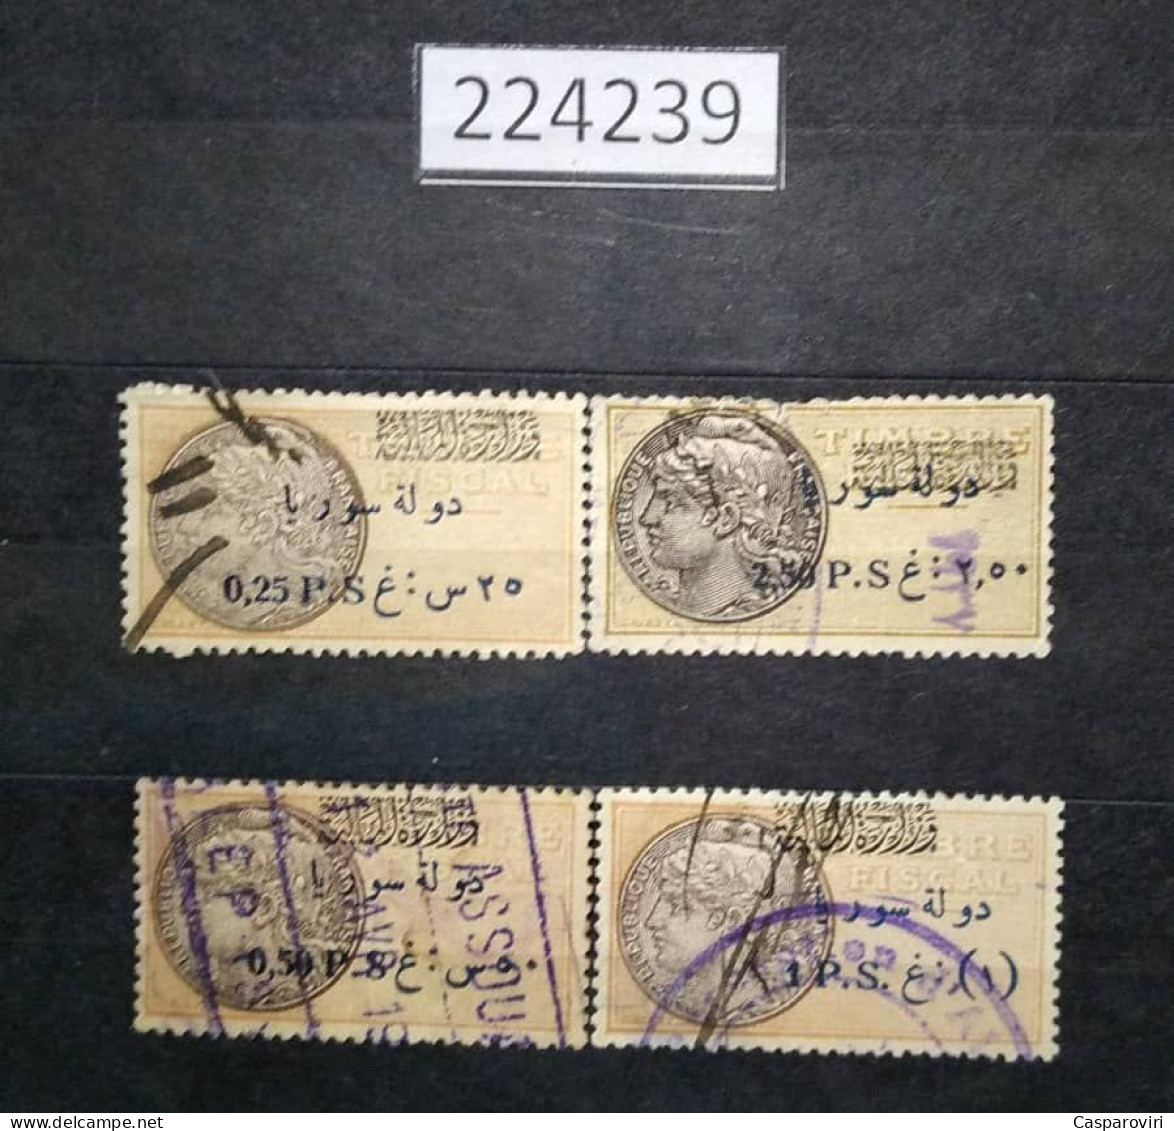 224239; French Colonies; Syria; 4 Revenue French Stamps 0.25, 0.5, 1, 2.5  Piasters ;Ovpt. Etat De Syrie; USED - Oblitérés